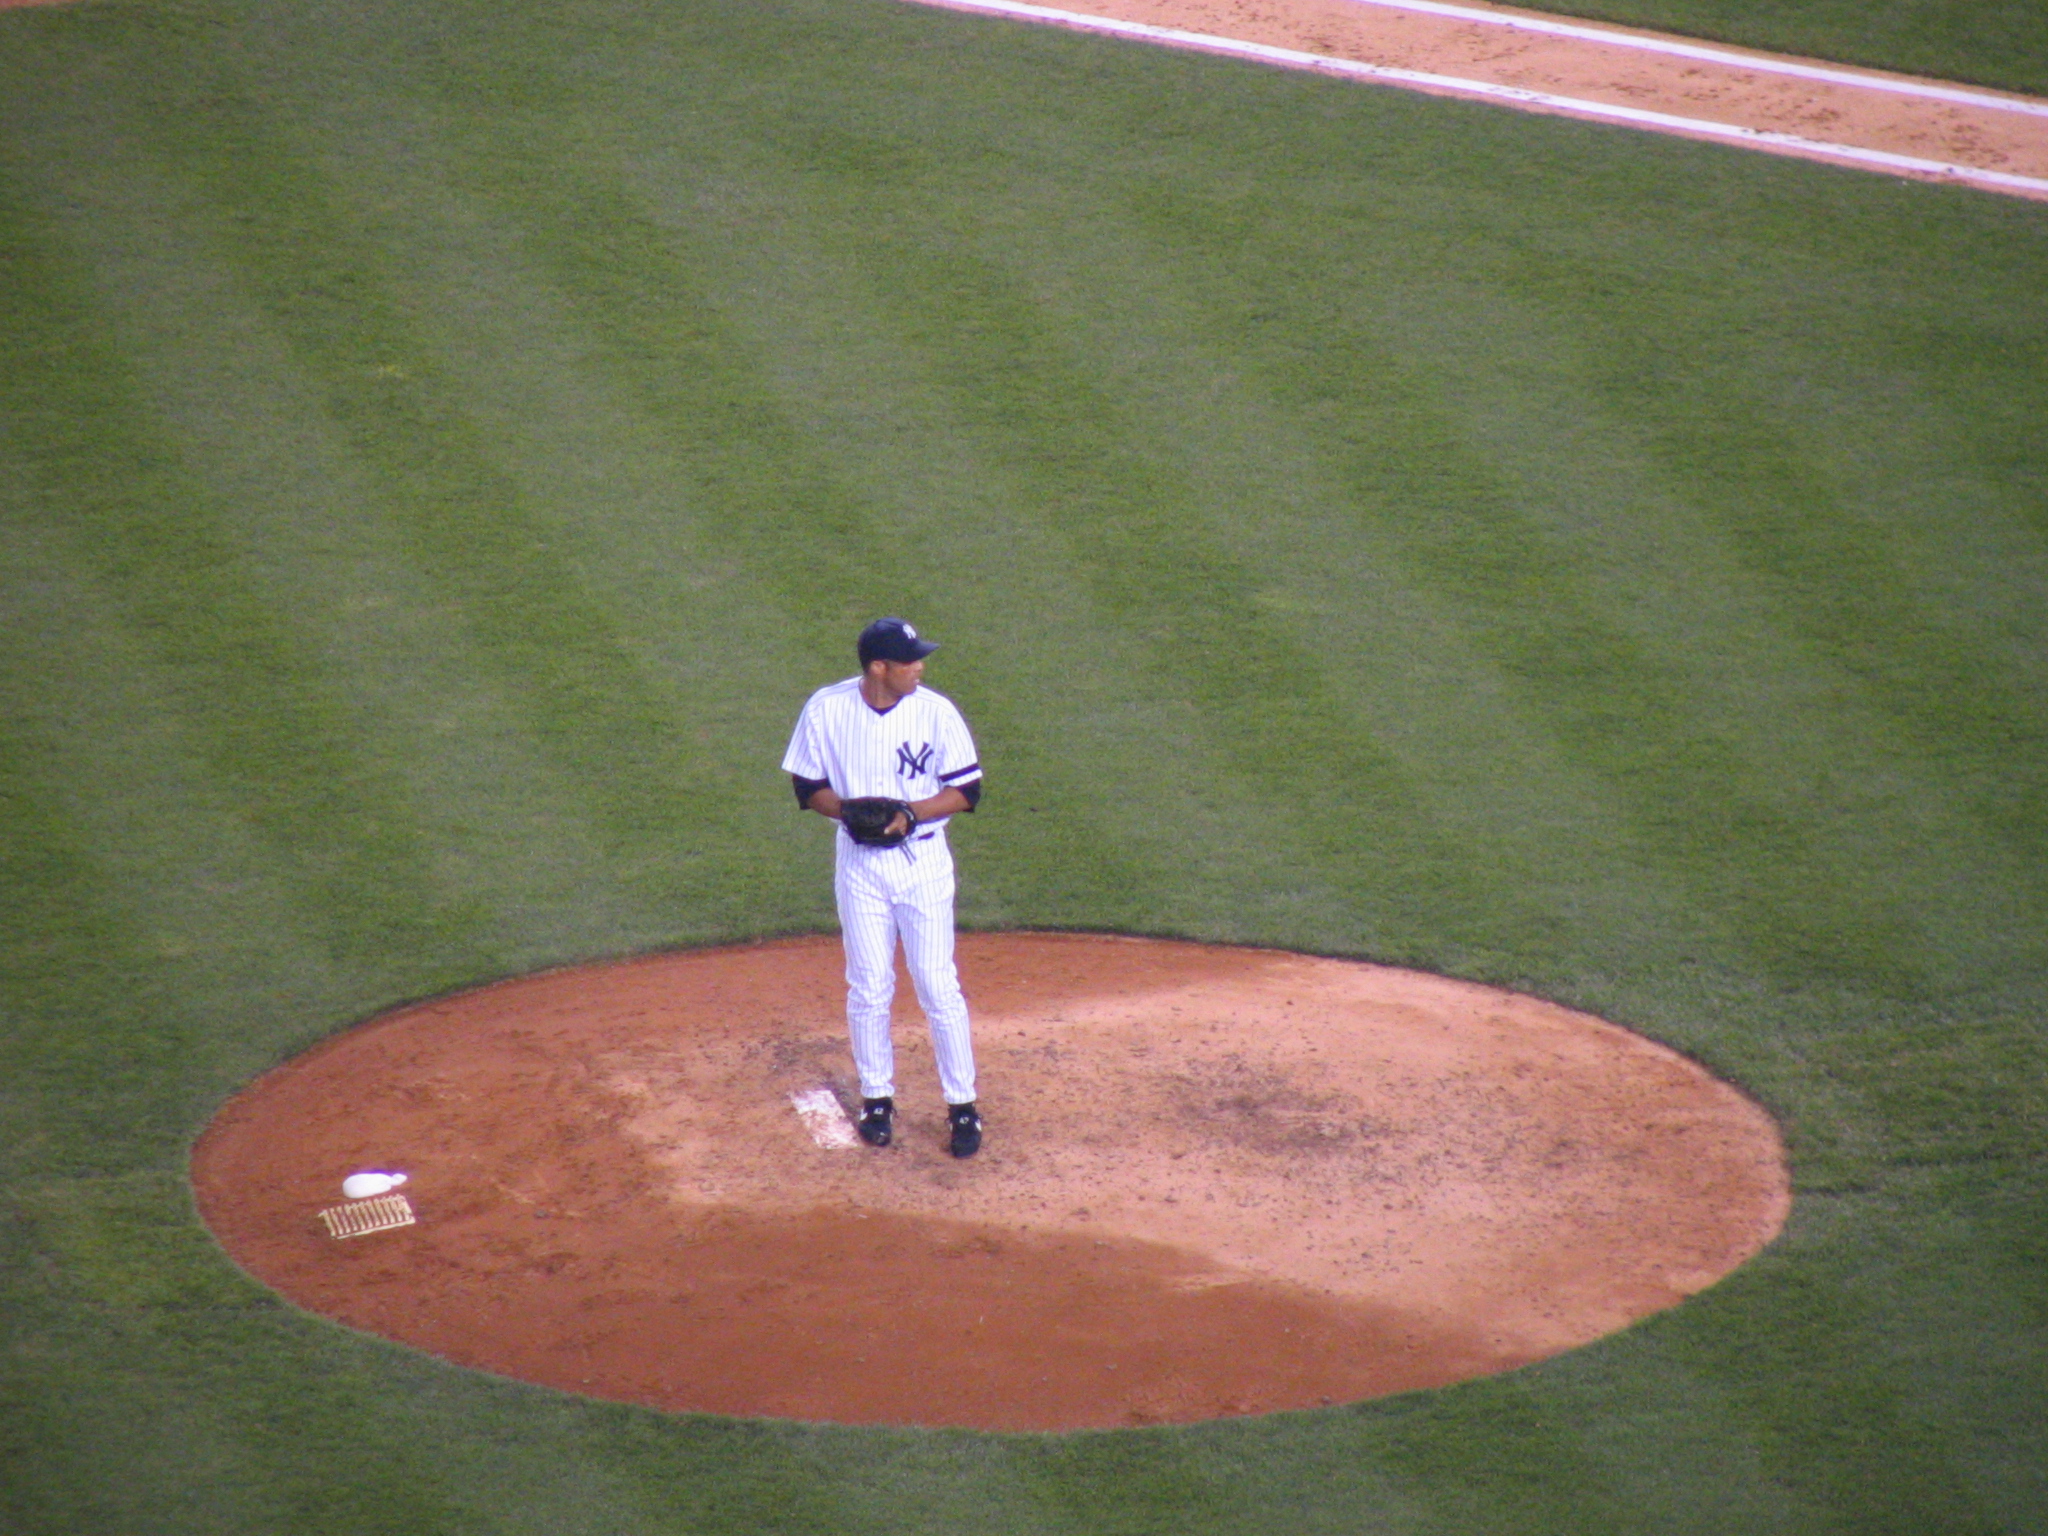 a baseball player stands on the pitcher's mound in his uniform